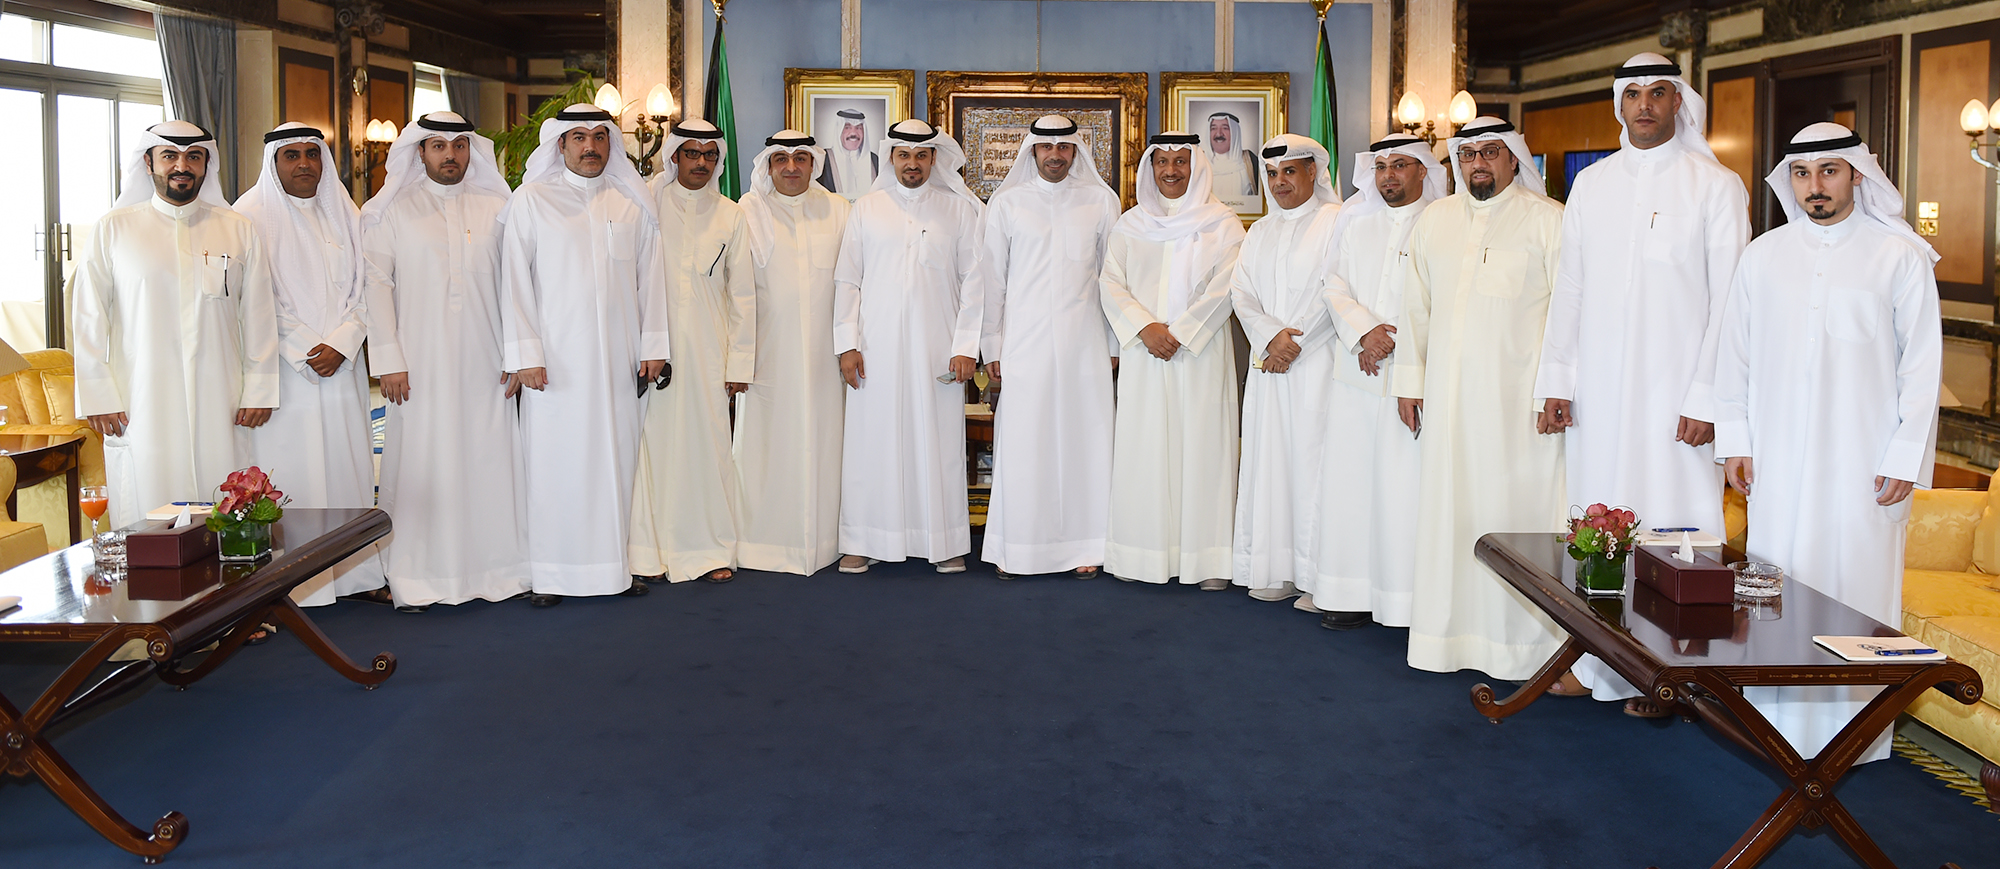 His Highness the Prime Minister Sheikh Jaber Mubarak Al-Hamad Al-Sabah receives Minister of State for Housing and Services Affairs Yasser Hassan Abul, accompanied by number of citizens concerned at the housing issue